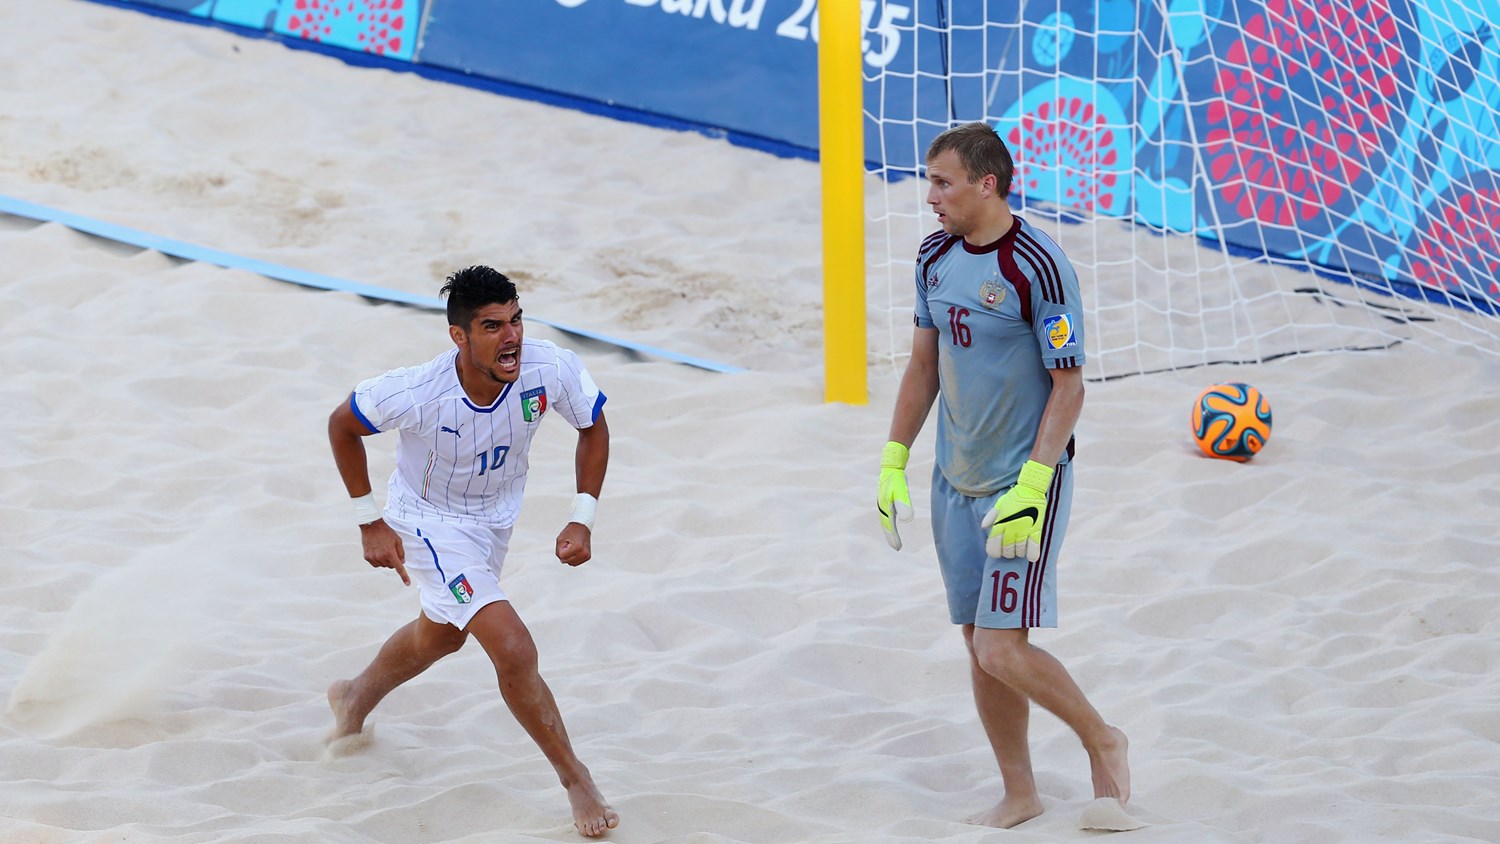 Italy stun Russia to set up tense Beach Soccer finale